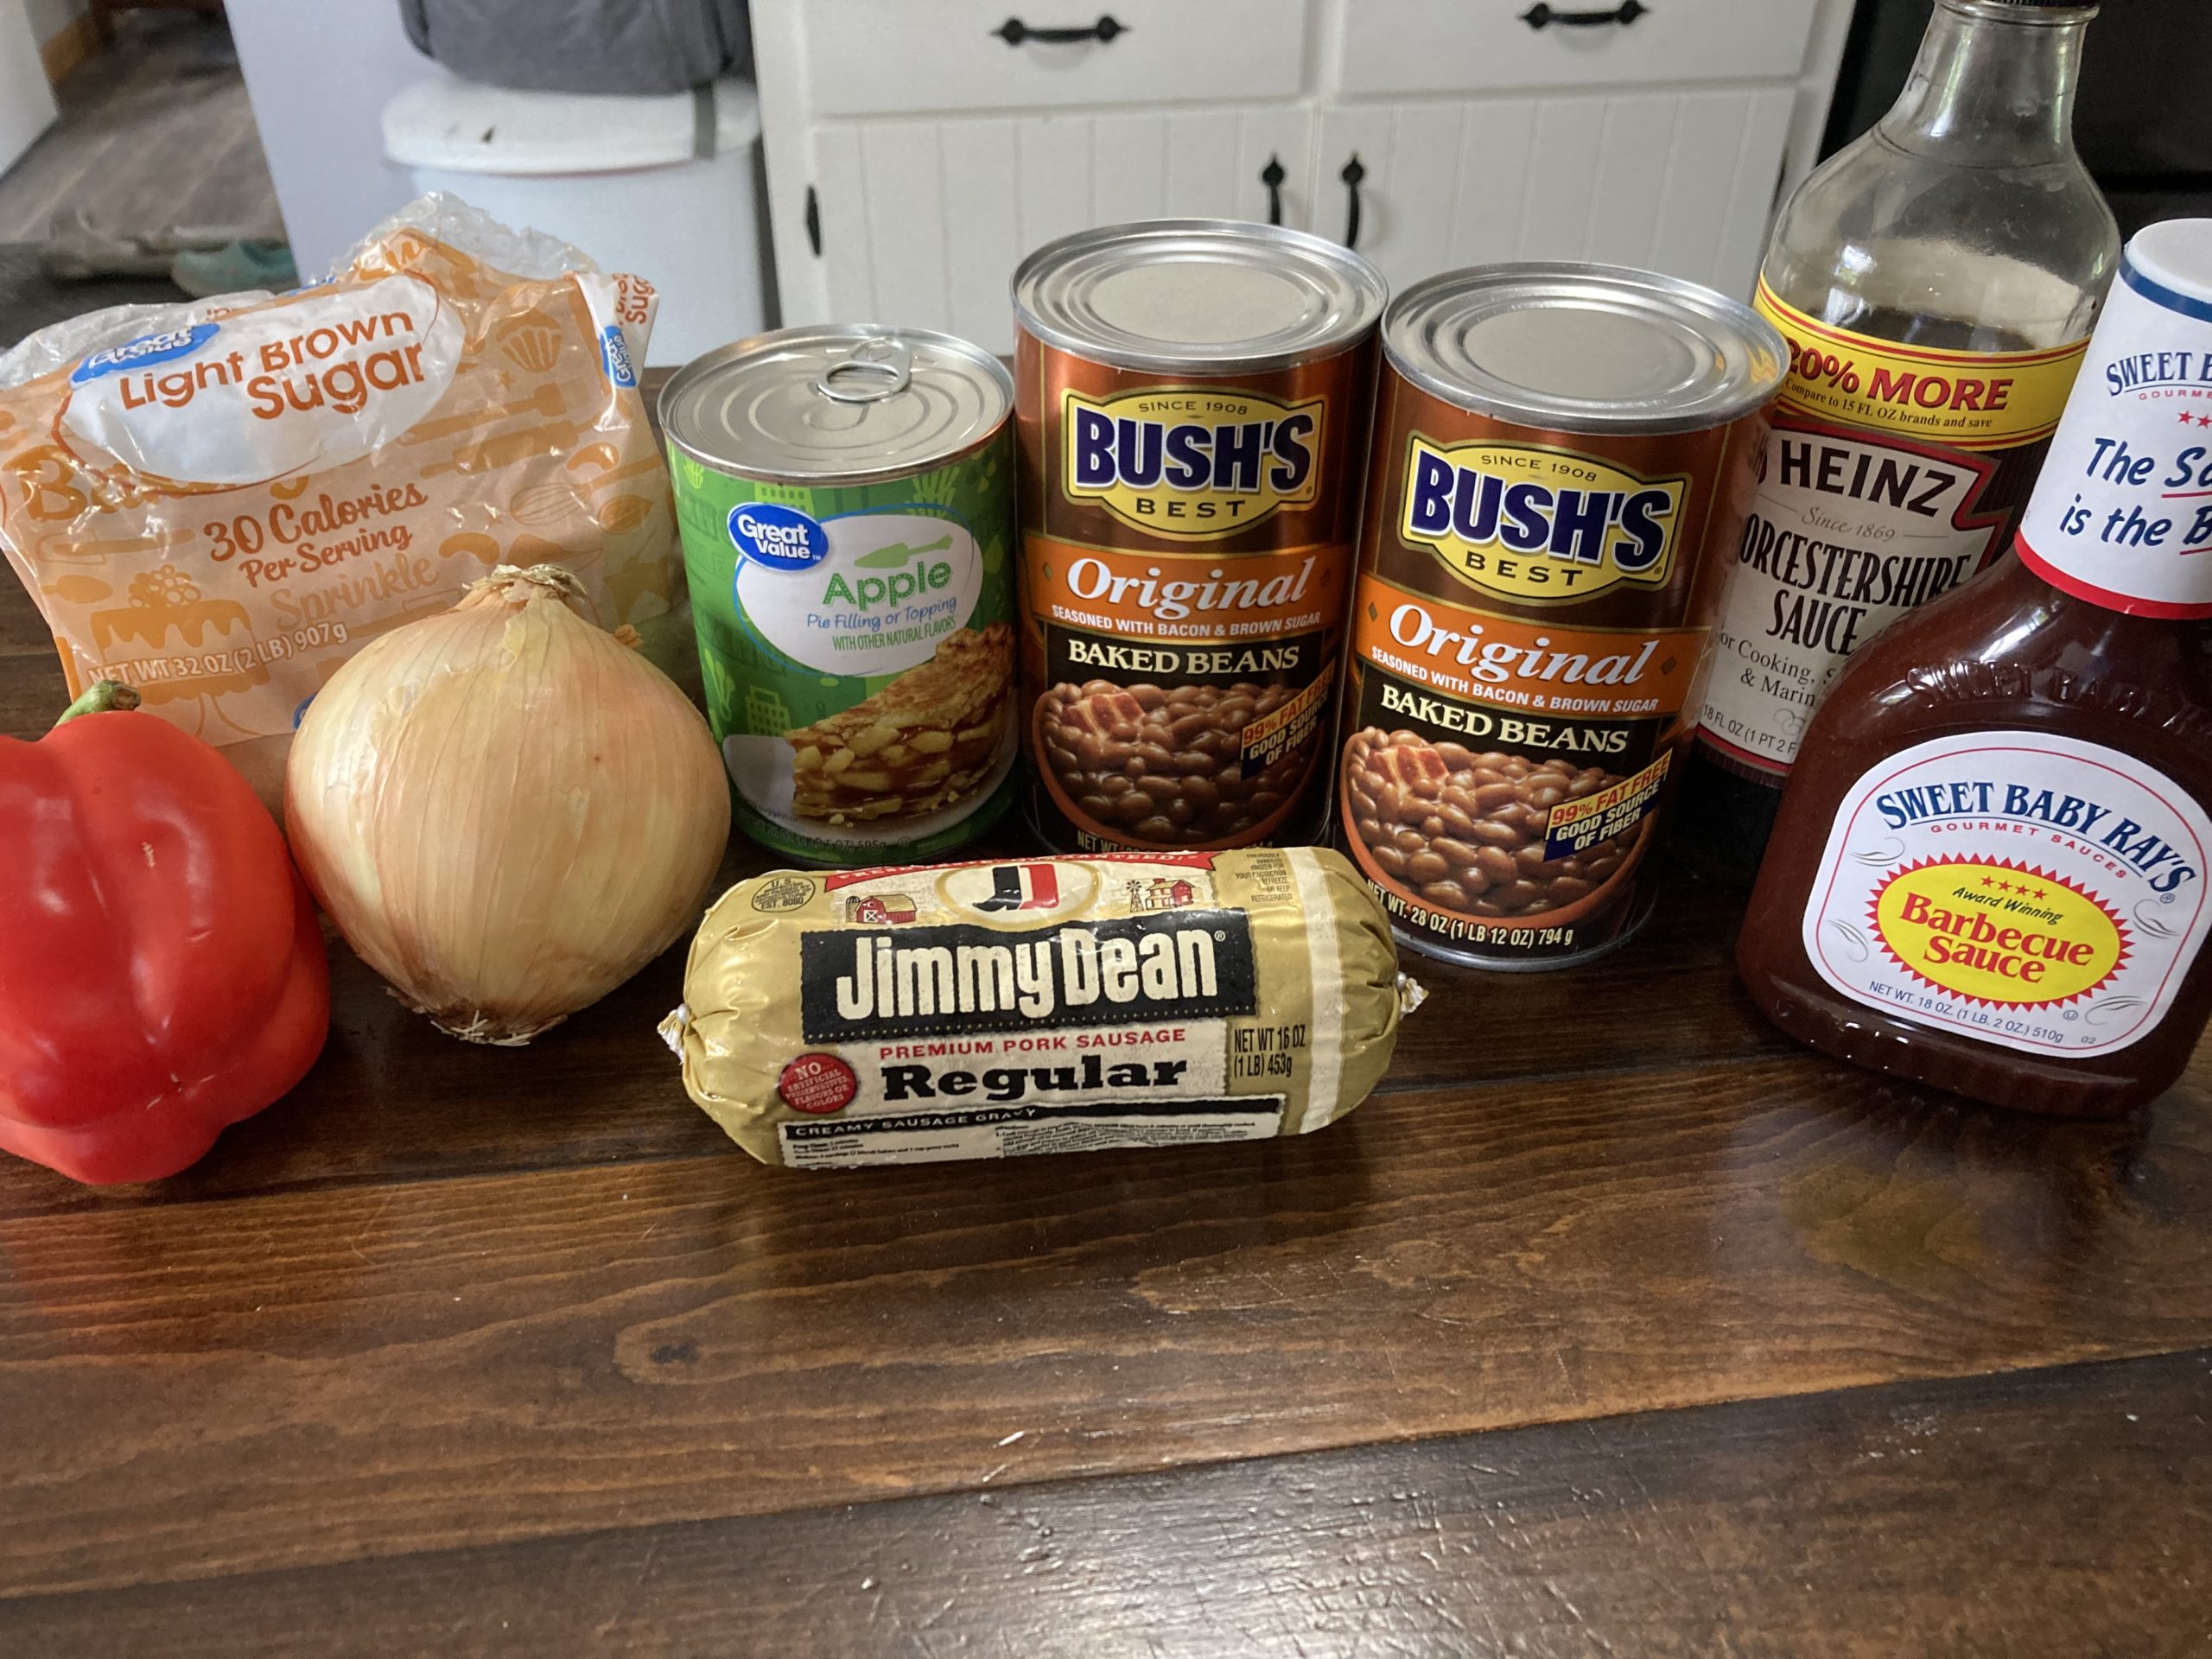 The Best Smoked Apple Pie Baked Beans